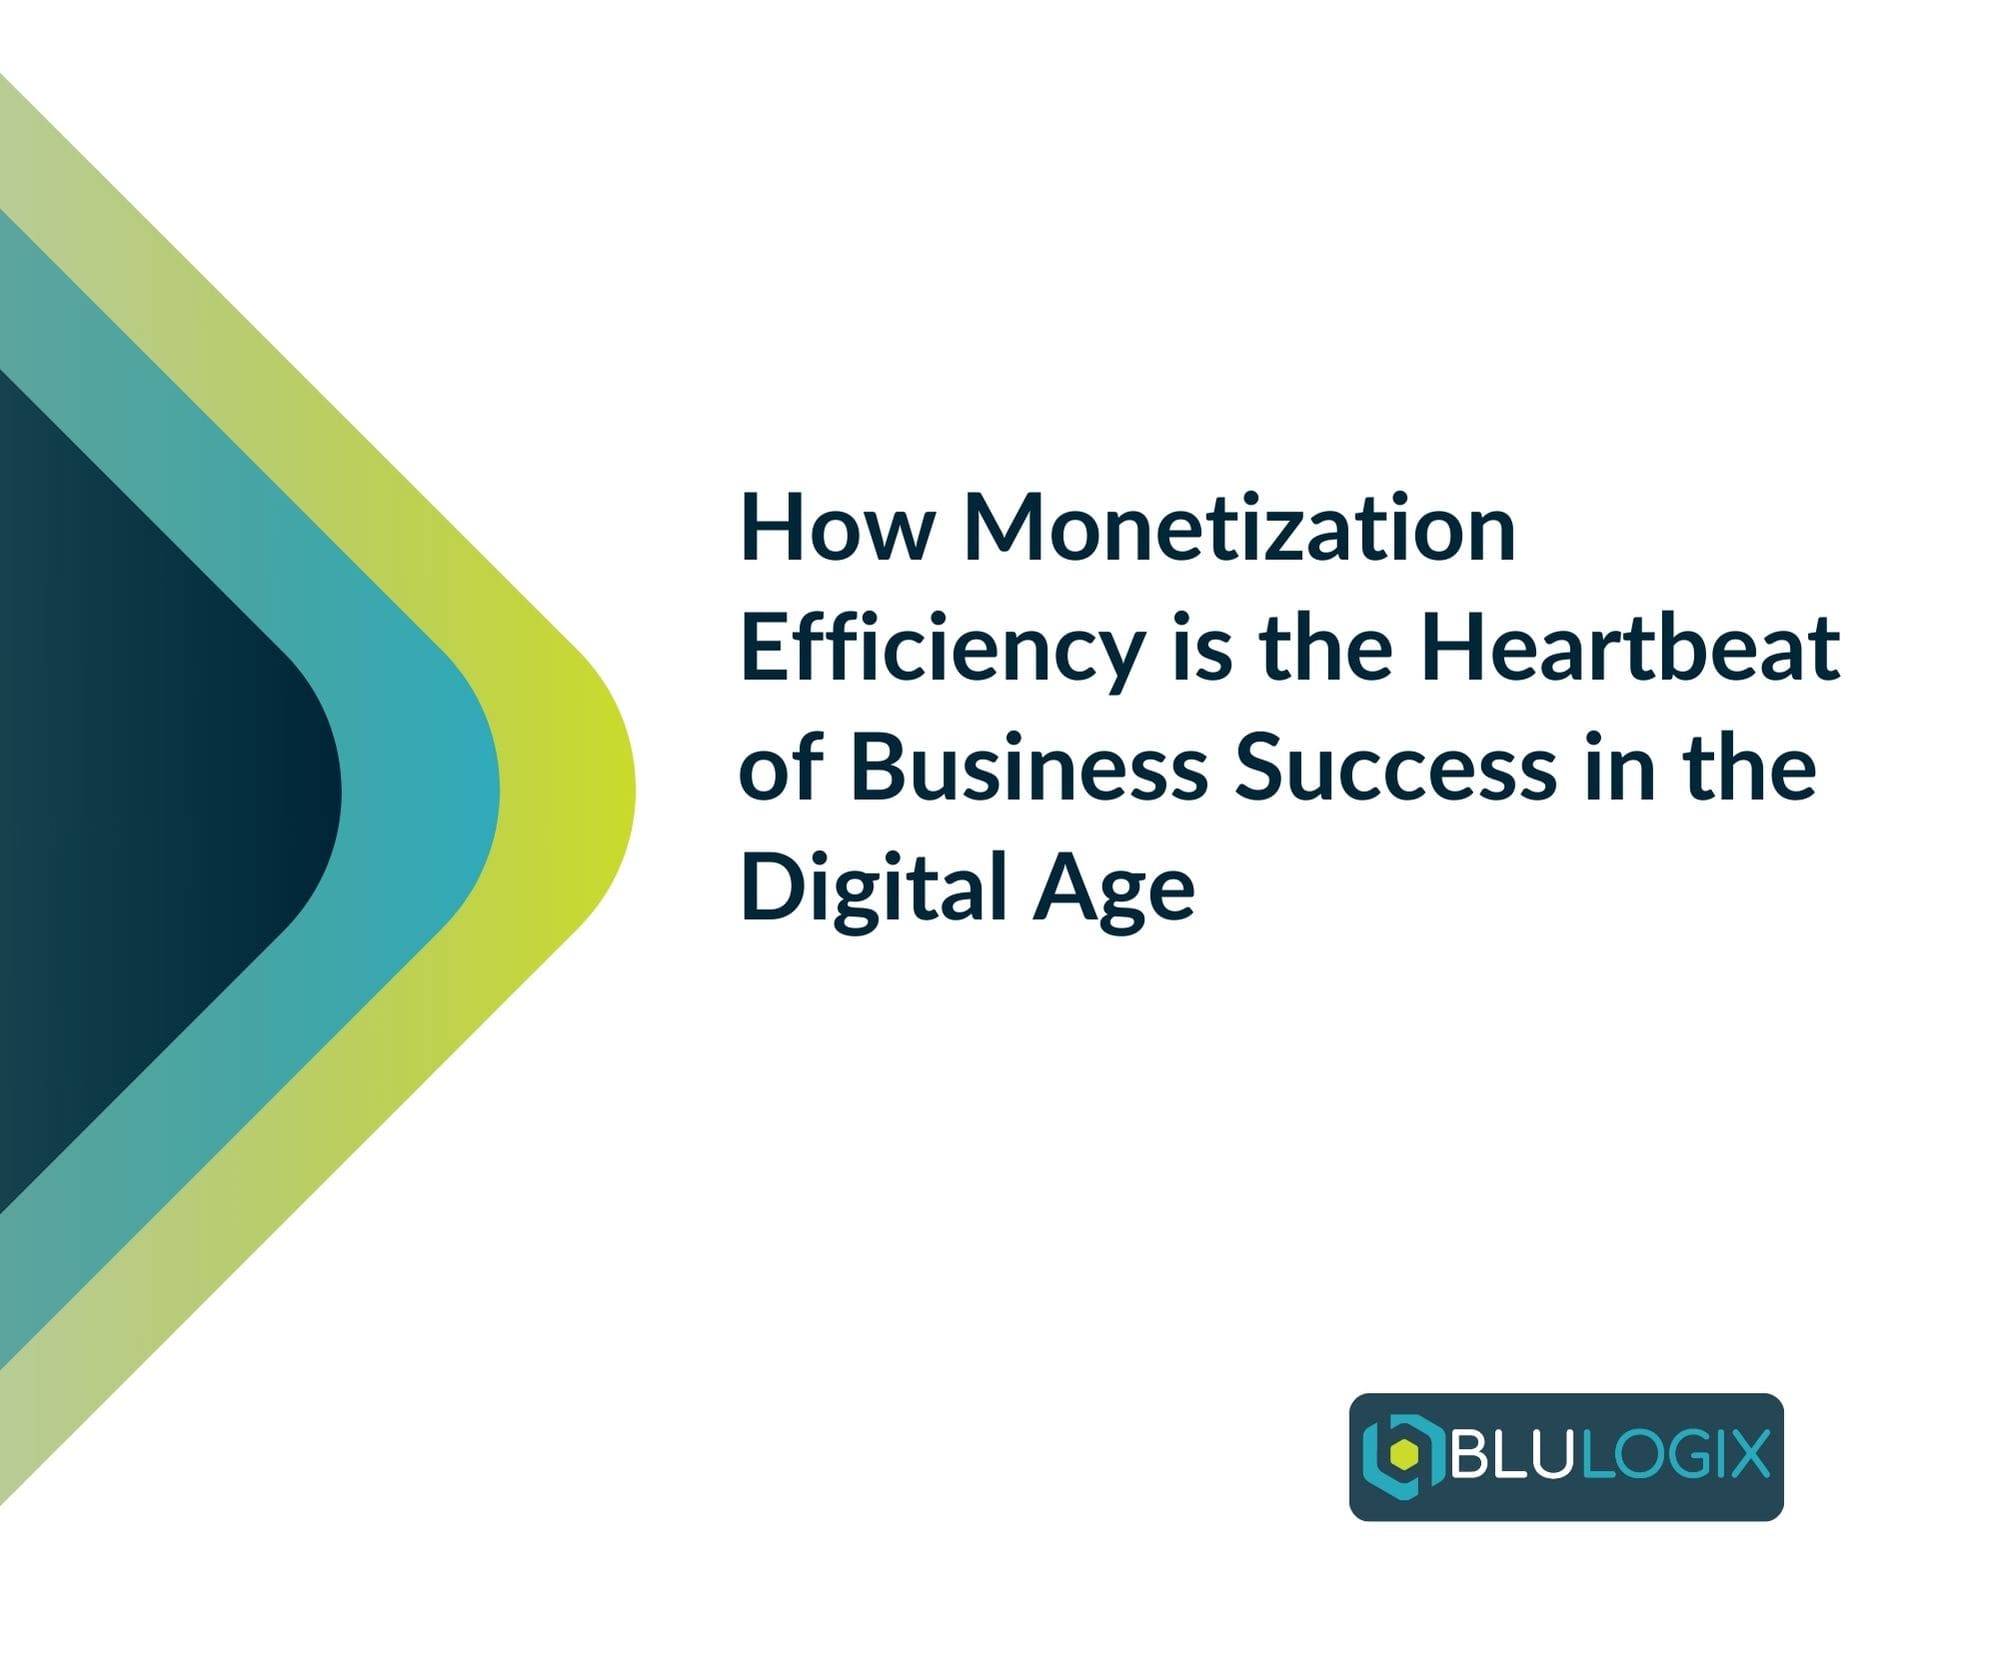 How Monetization Efficiency is the Heartbeat of Business Success in the Digital Age